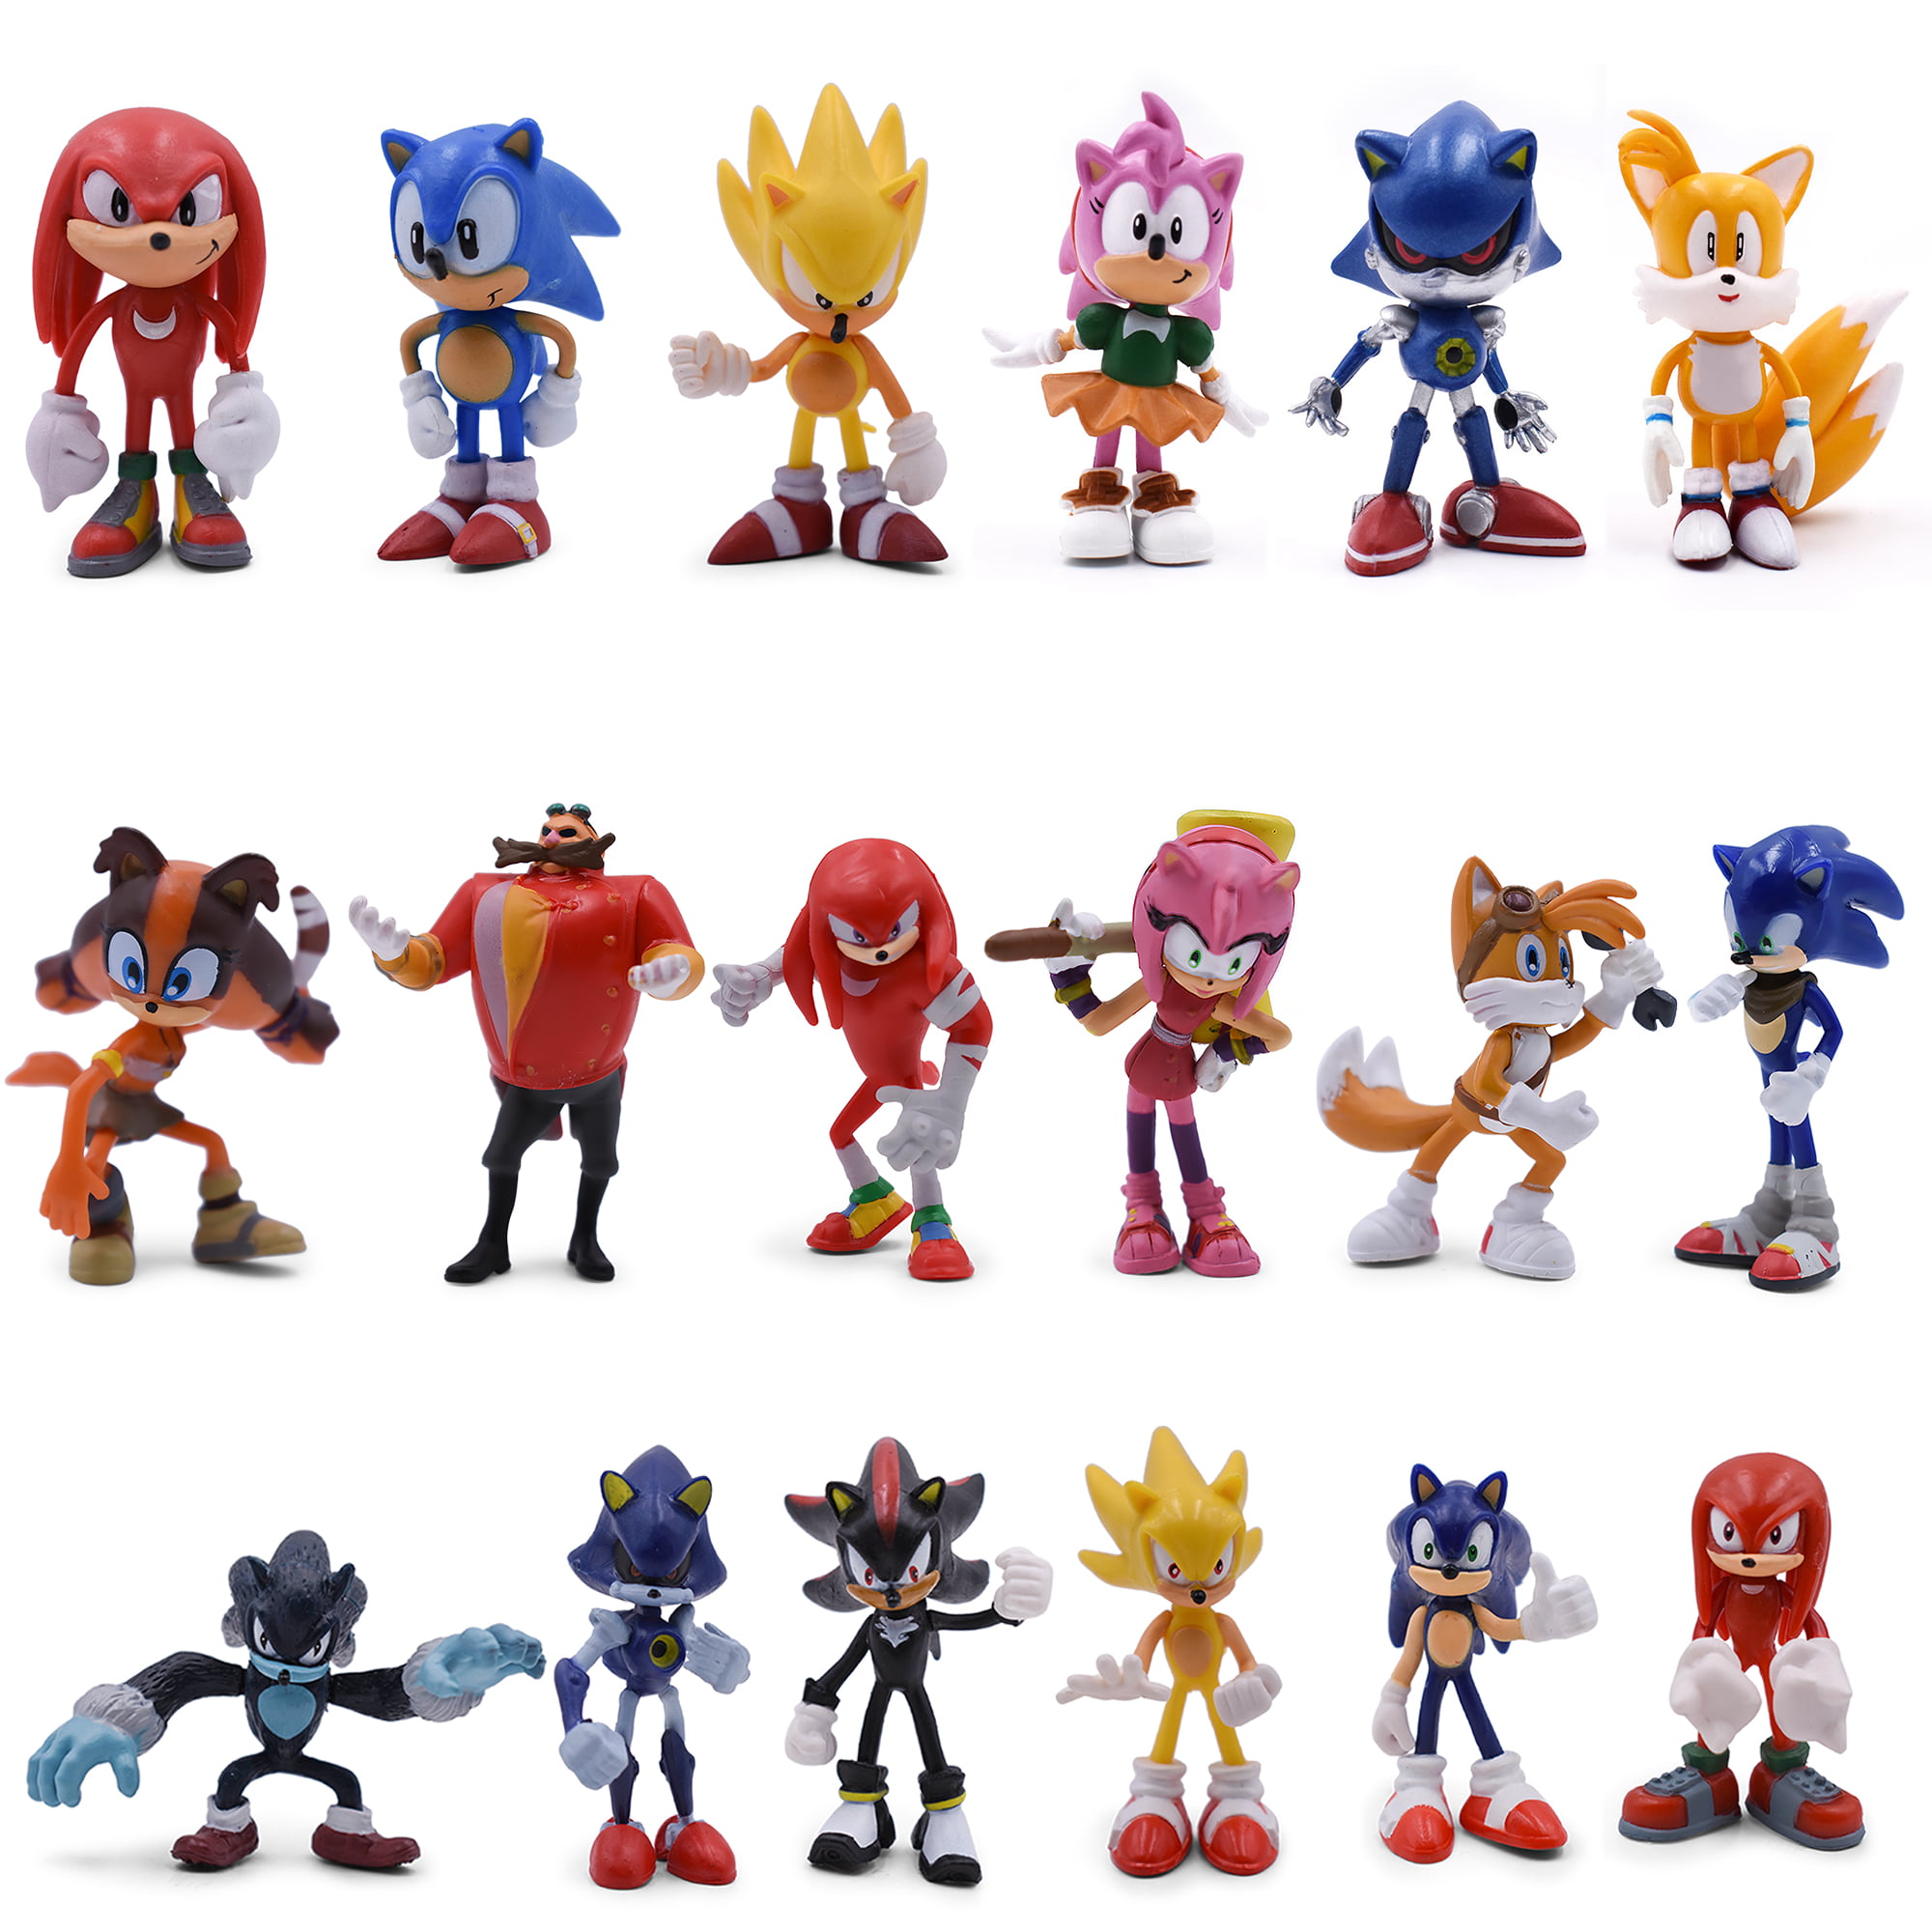  Sonic Action Figures Toys, 18 Pcs Action Figures for